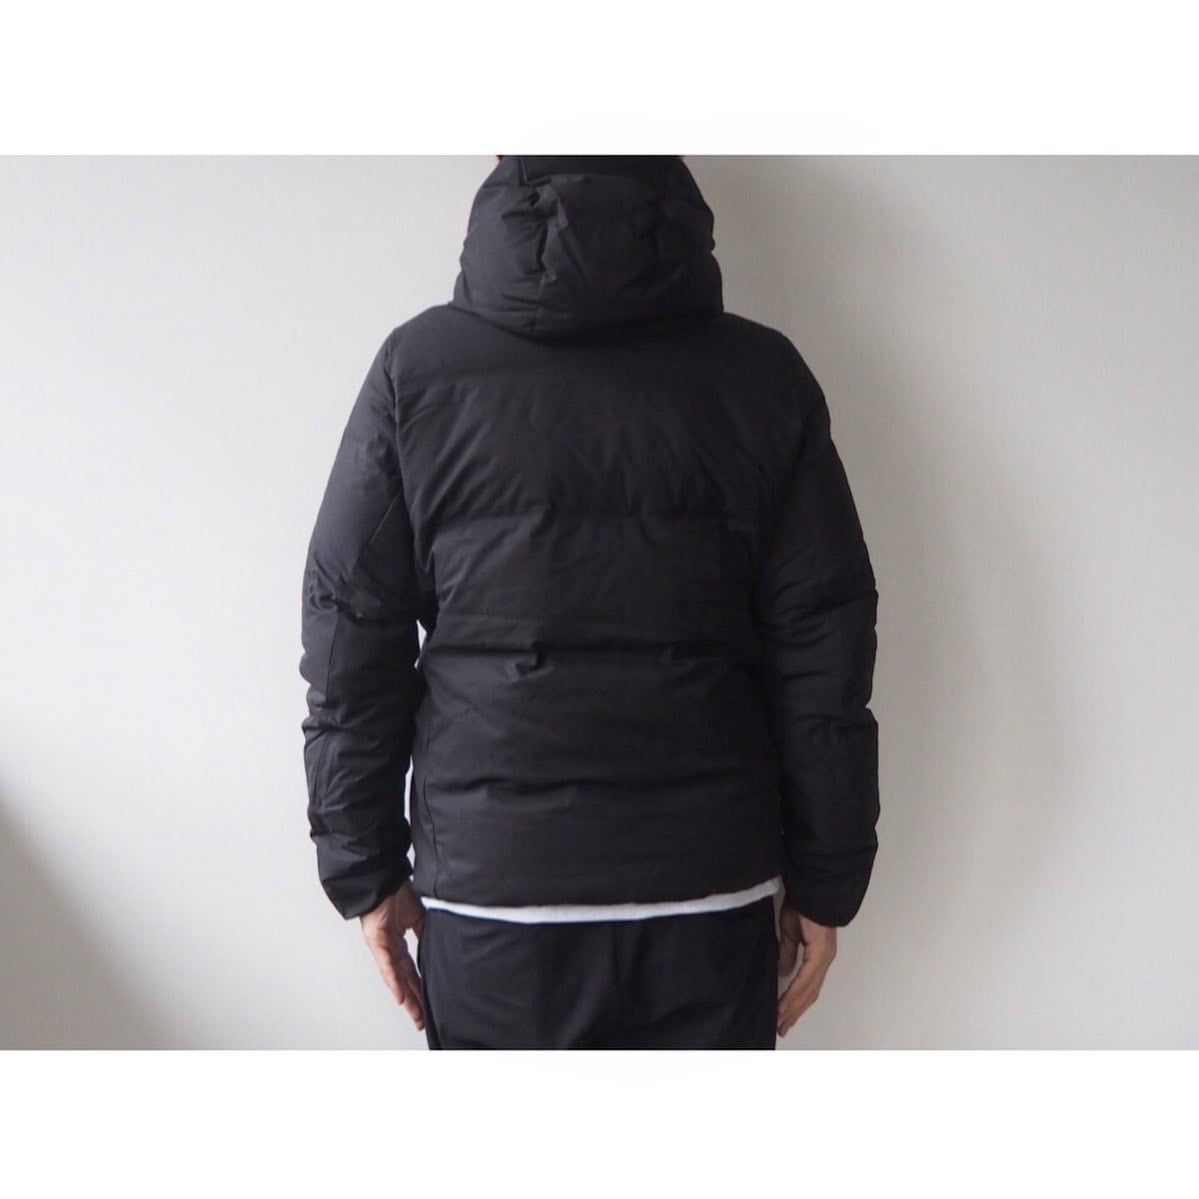 DESCENTE ALLTERRAIN (デサント オルテライン) MIZUSAWA DOWN JACKET『ANCHOR』 | AUTHENTIC  Life Store powered by BASE